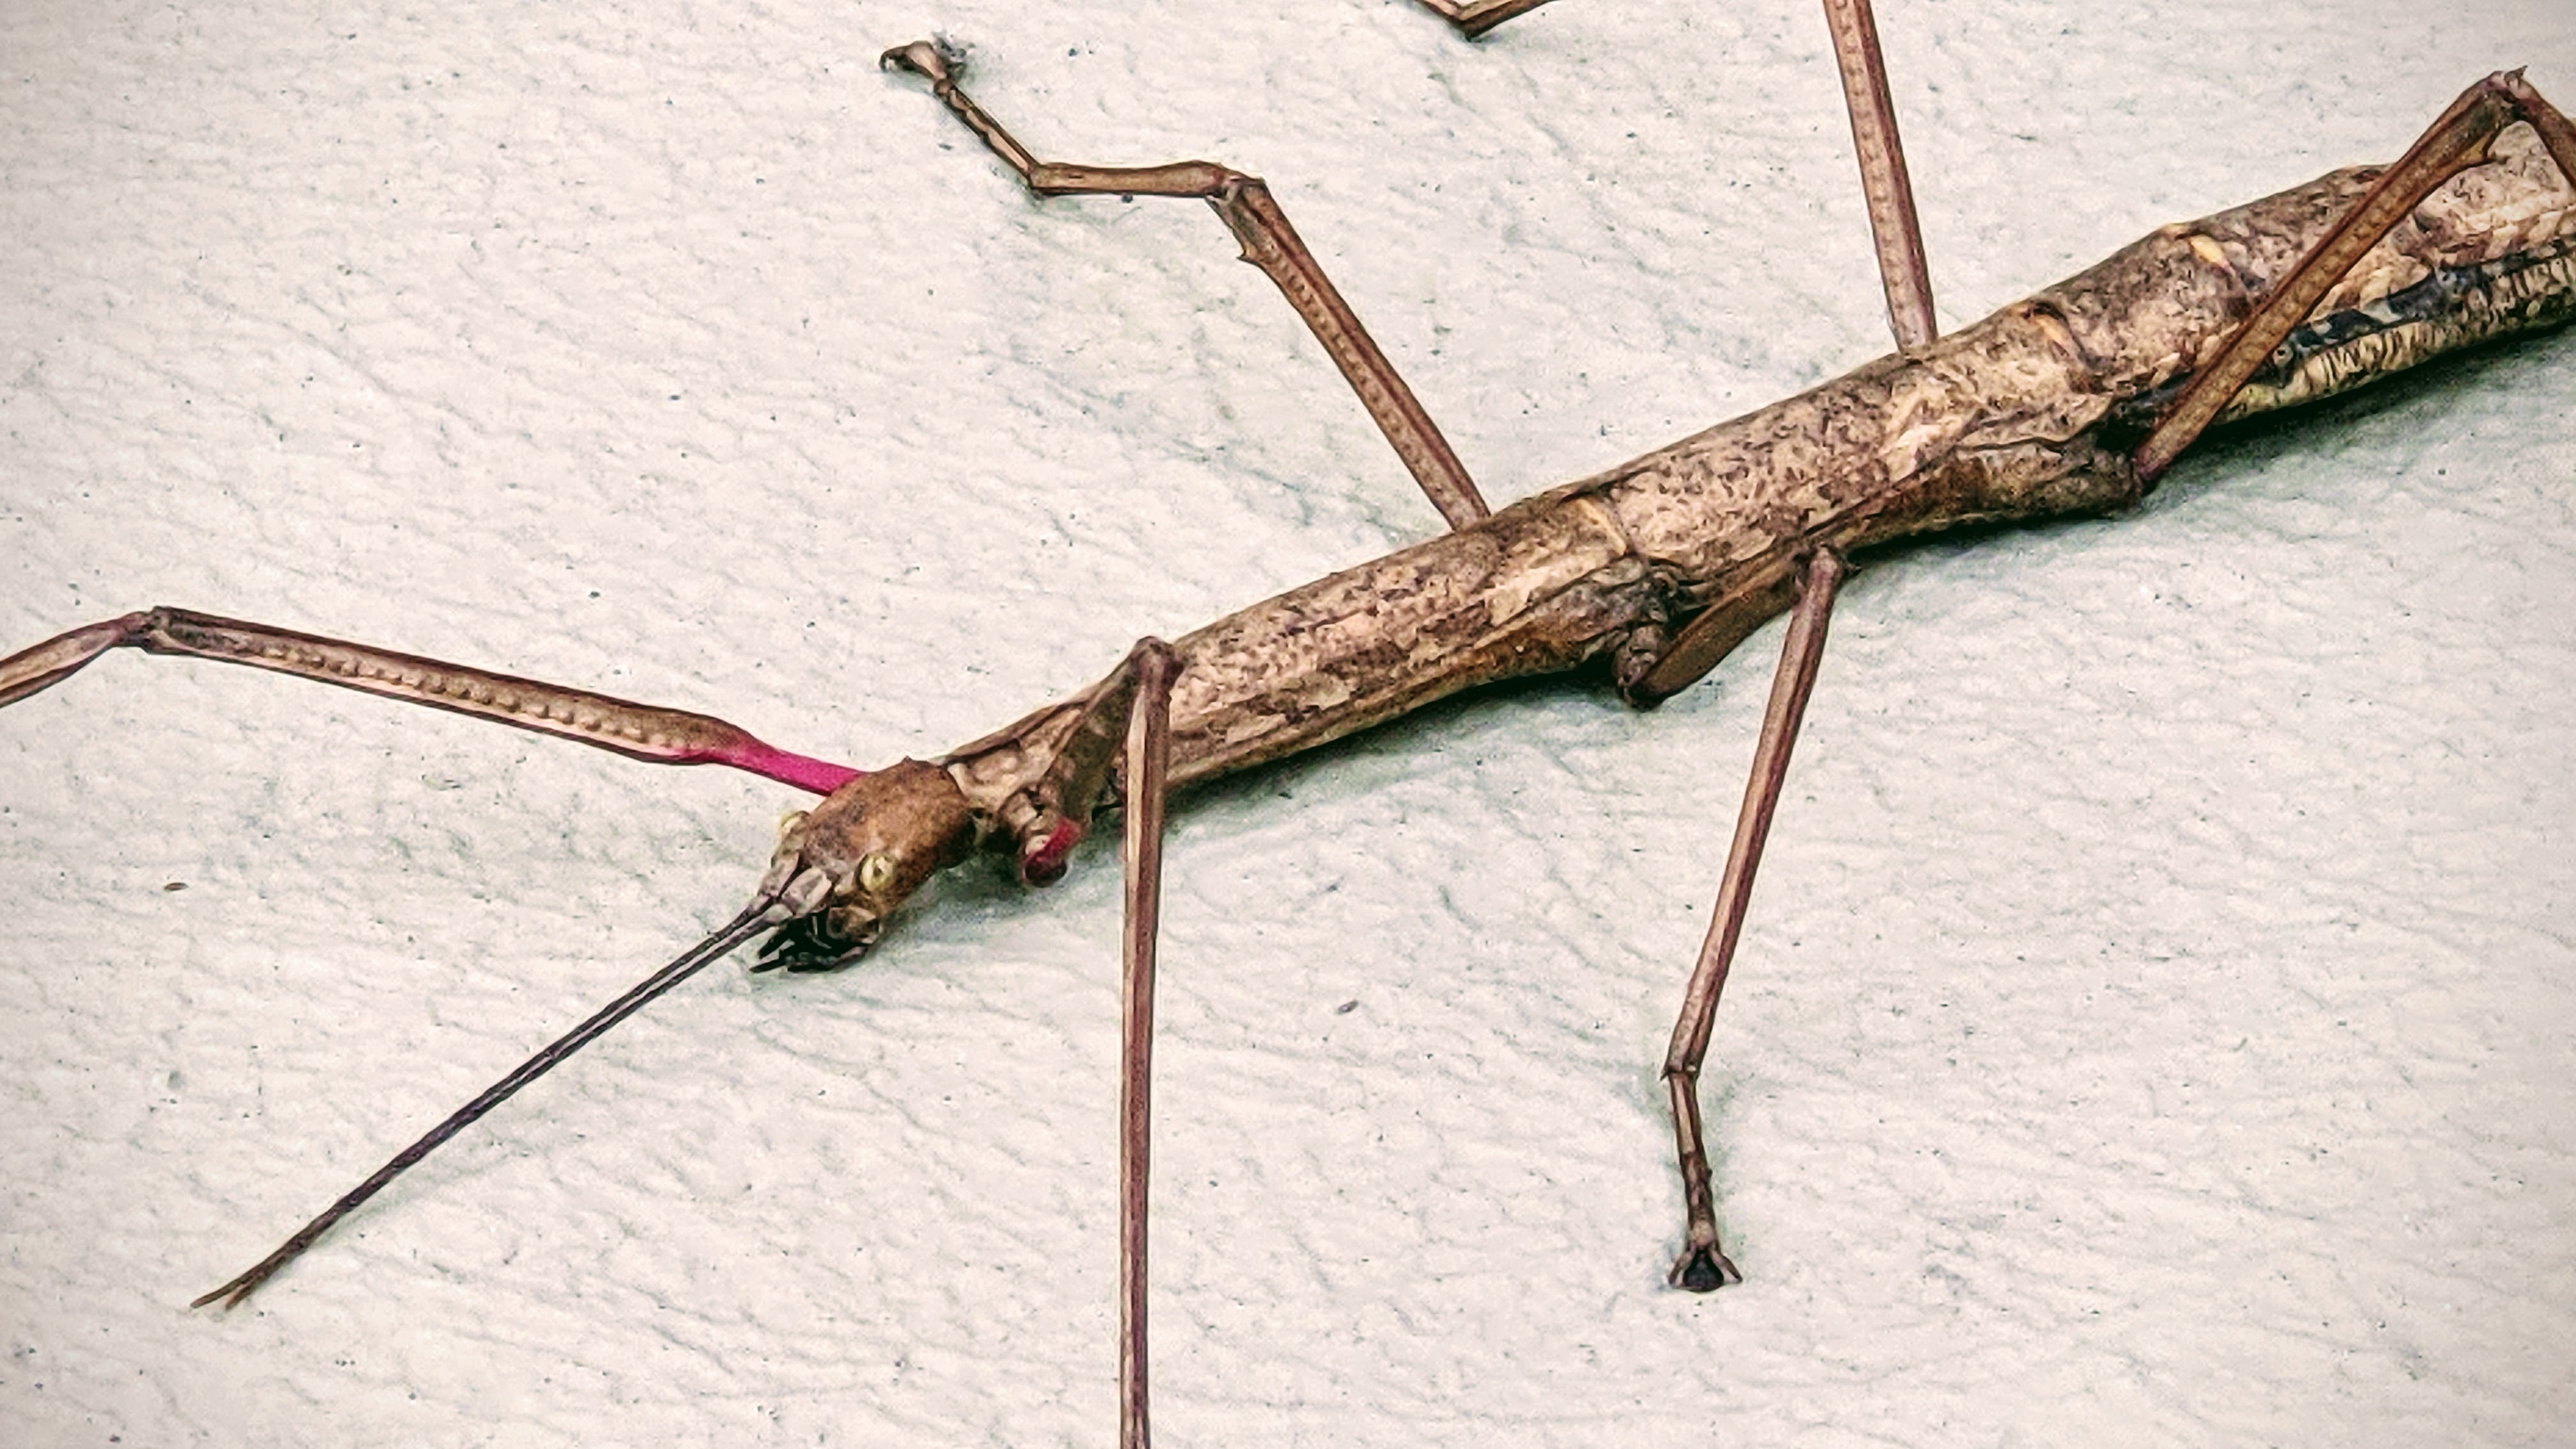 Front section of a New Zealand Stick Insect